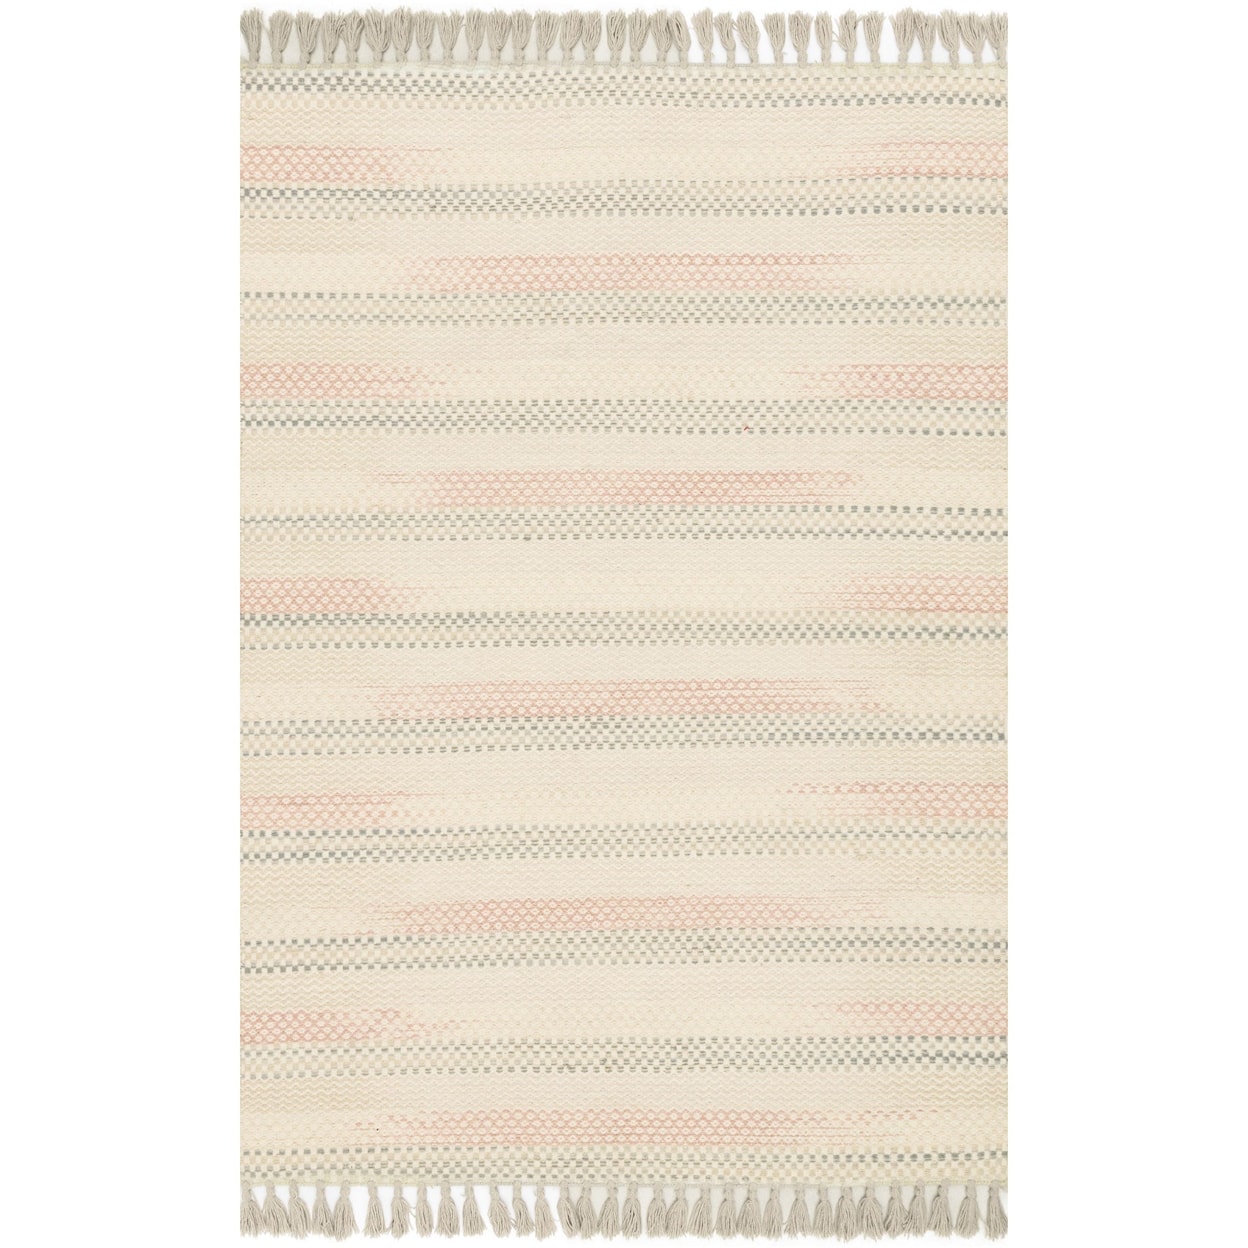 Magnolia Home by Joanna Gaines for Loloi Chantilly 2' 3" x 3' 9" Rectangle Rug